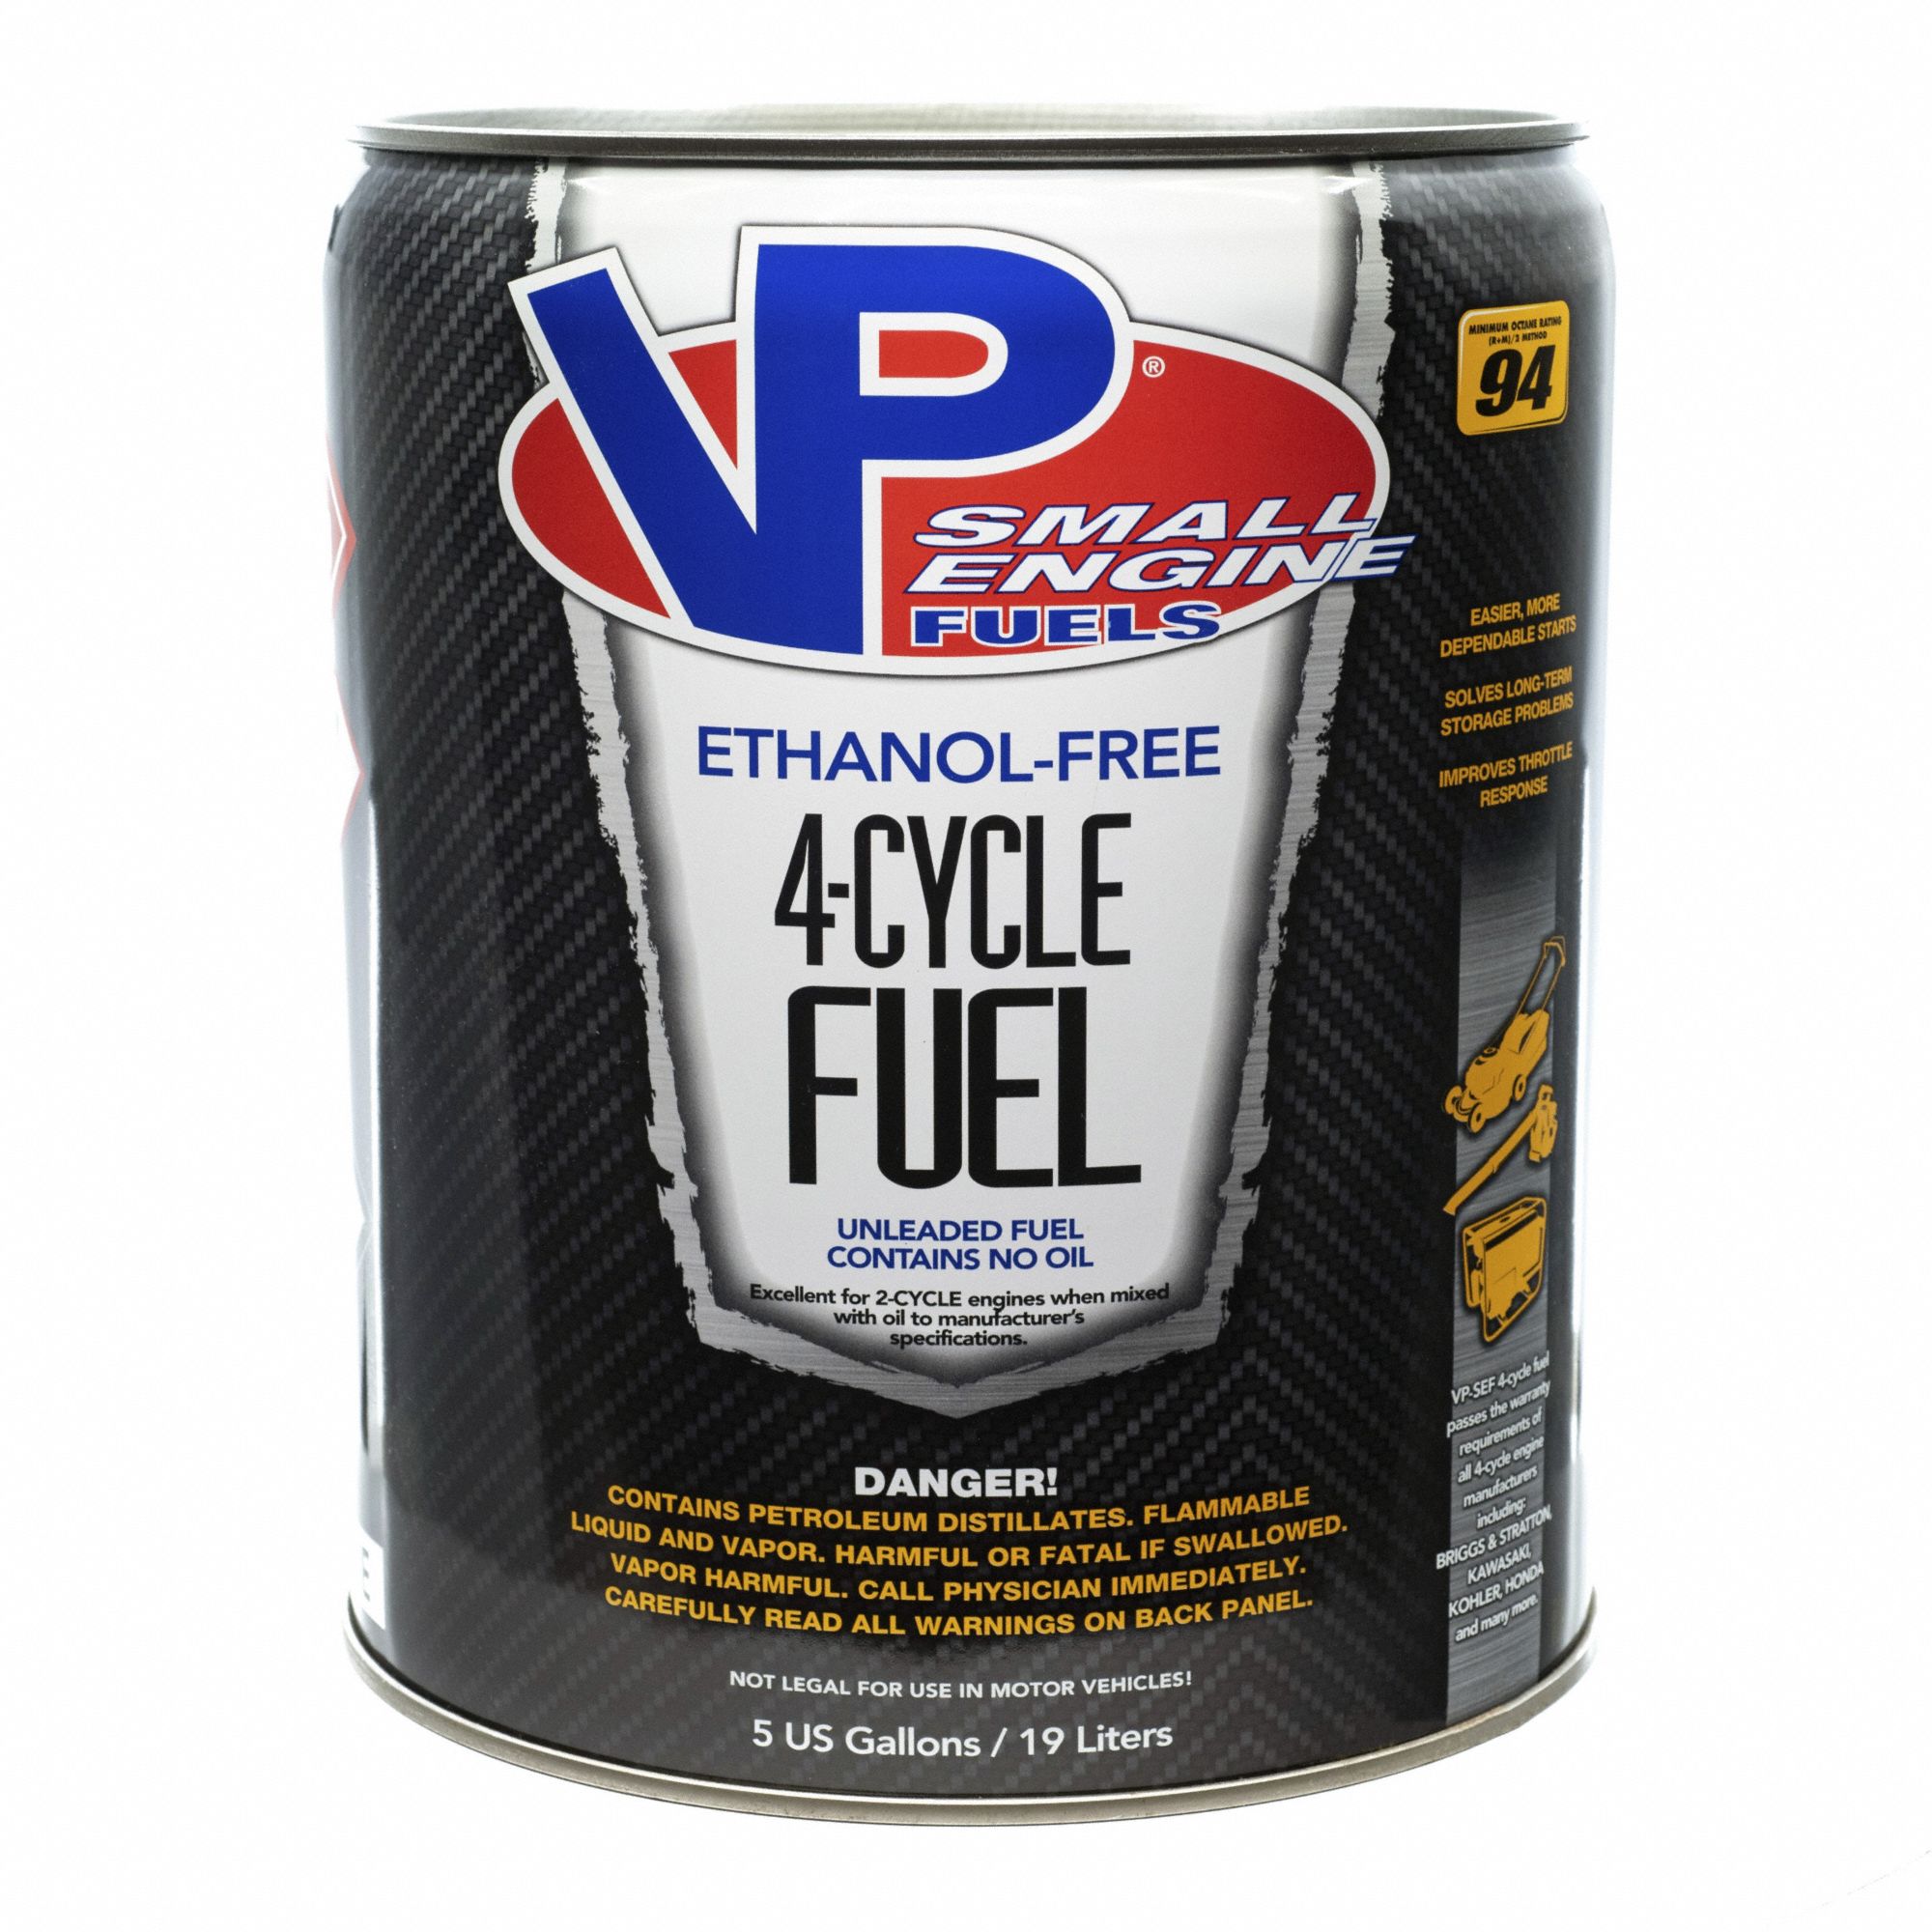 Small Engine Fuel, 4 Cycle: 54 gal Size, Clear